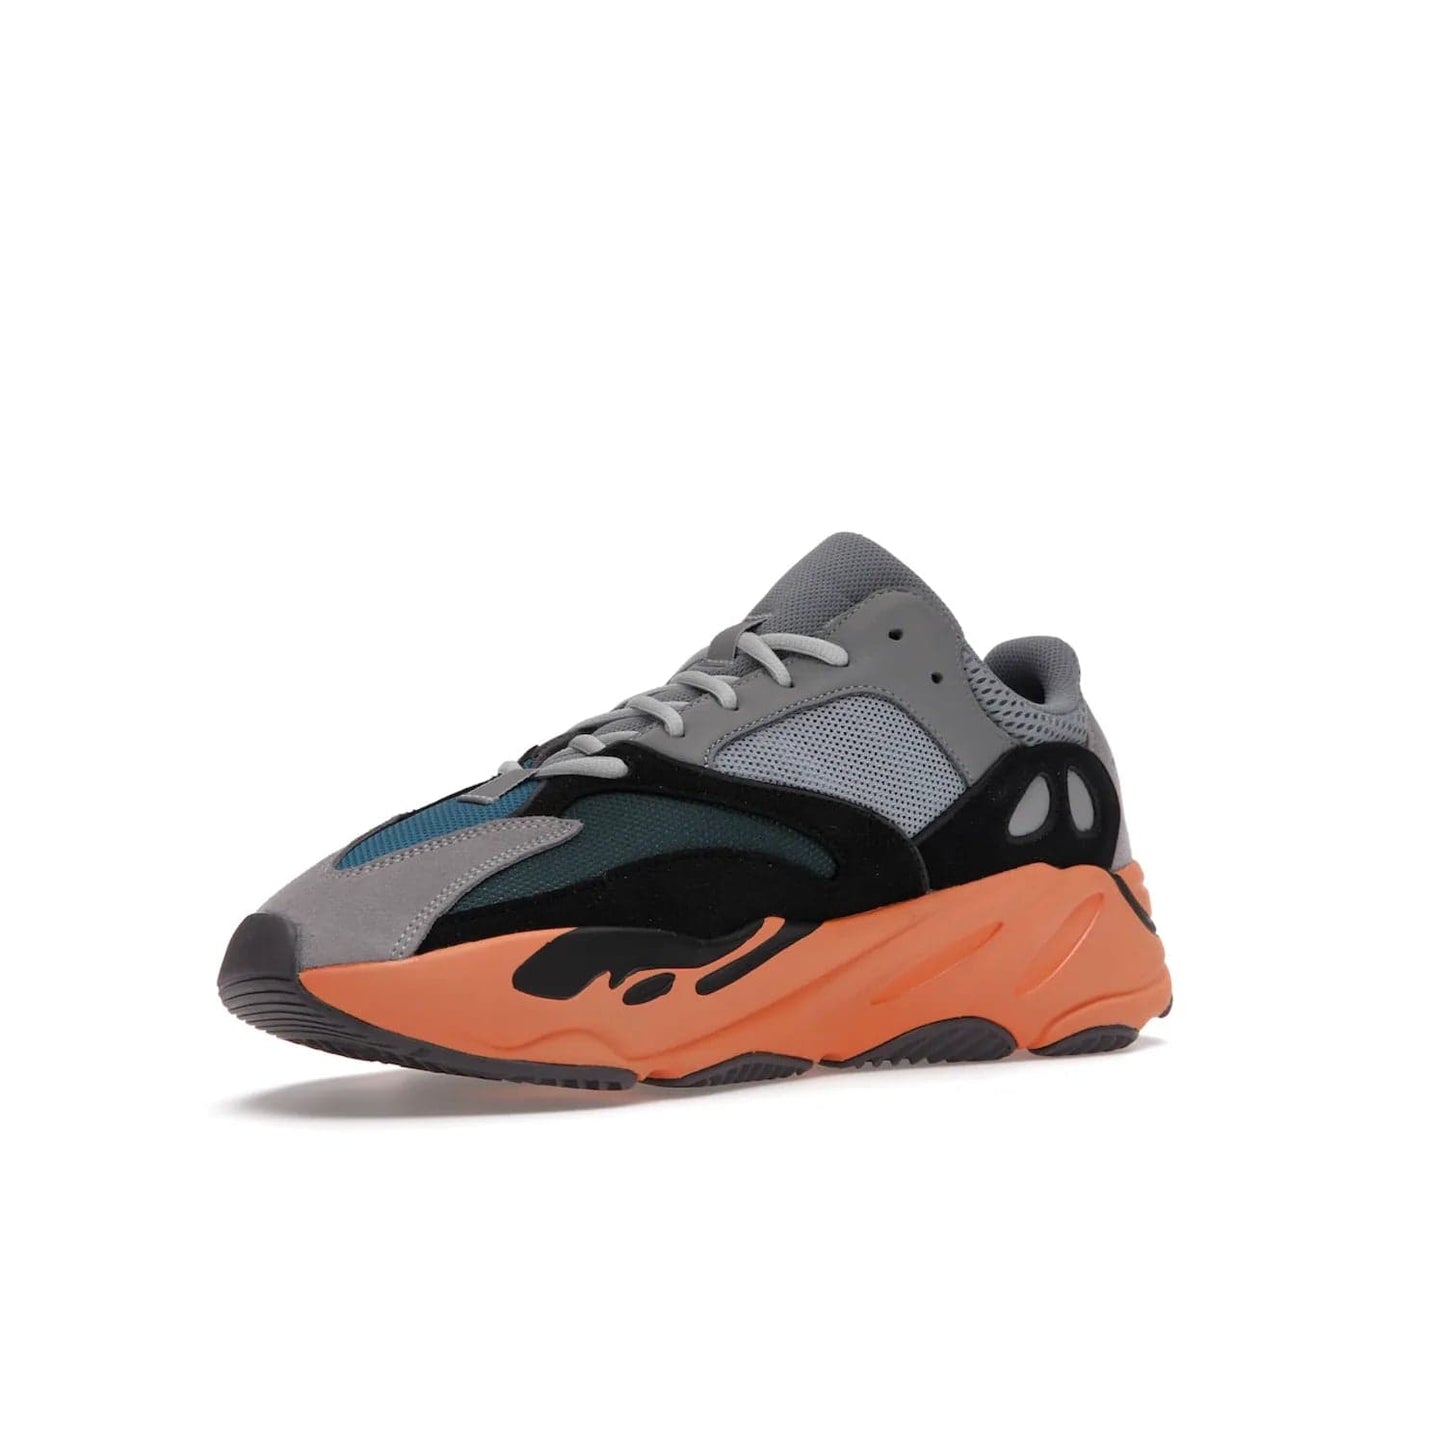 adidas Yeezy Boost 700 Wash Orange - Image 15 - Only at www.BallersClubKickz.com - Introducing the adidas Yeezy Boost 700 Wash Orange. Unique grey leather, suede, mesh upper and teal panels with a chunky Wash Orange Boost midsole. Release October 2021, make a statement today!